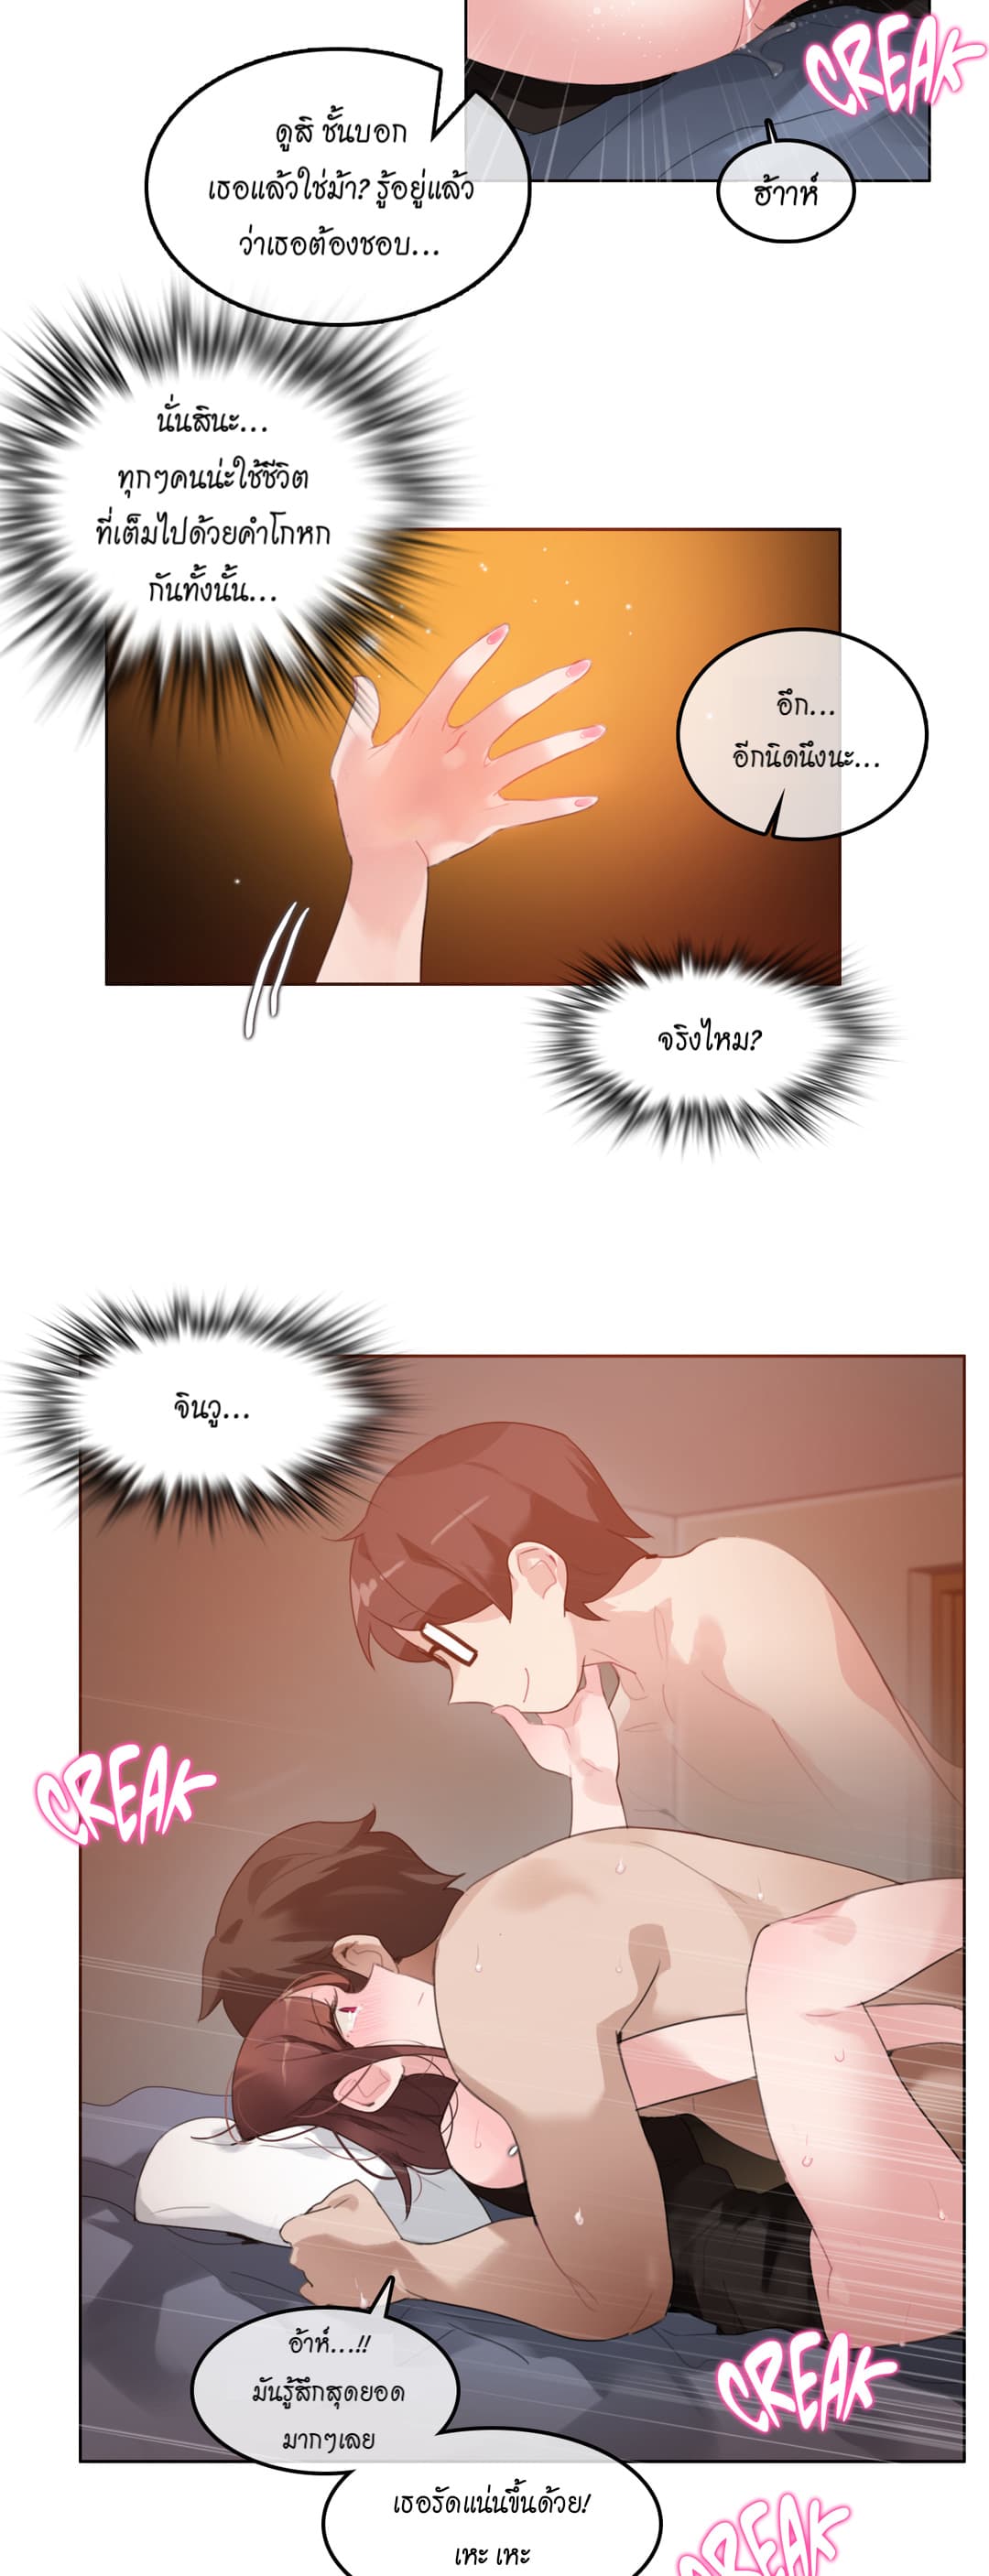 A Pervert’s Daily Life 26 (27)